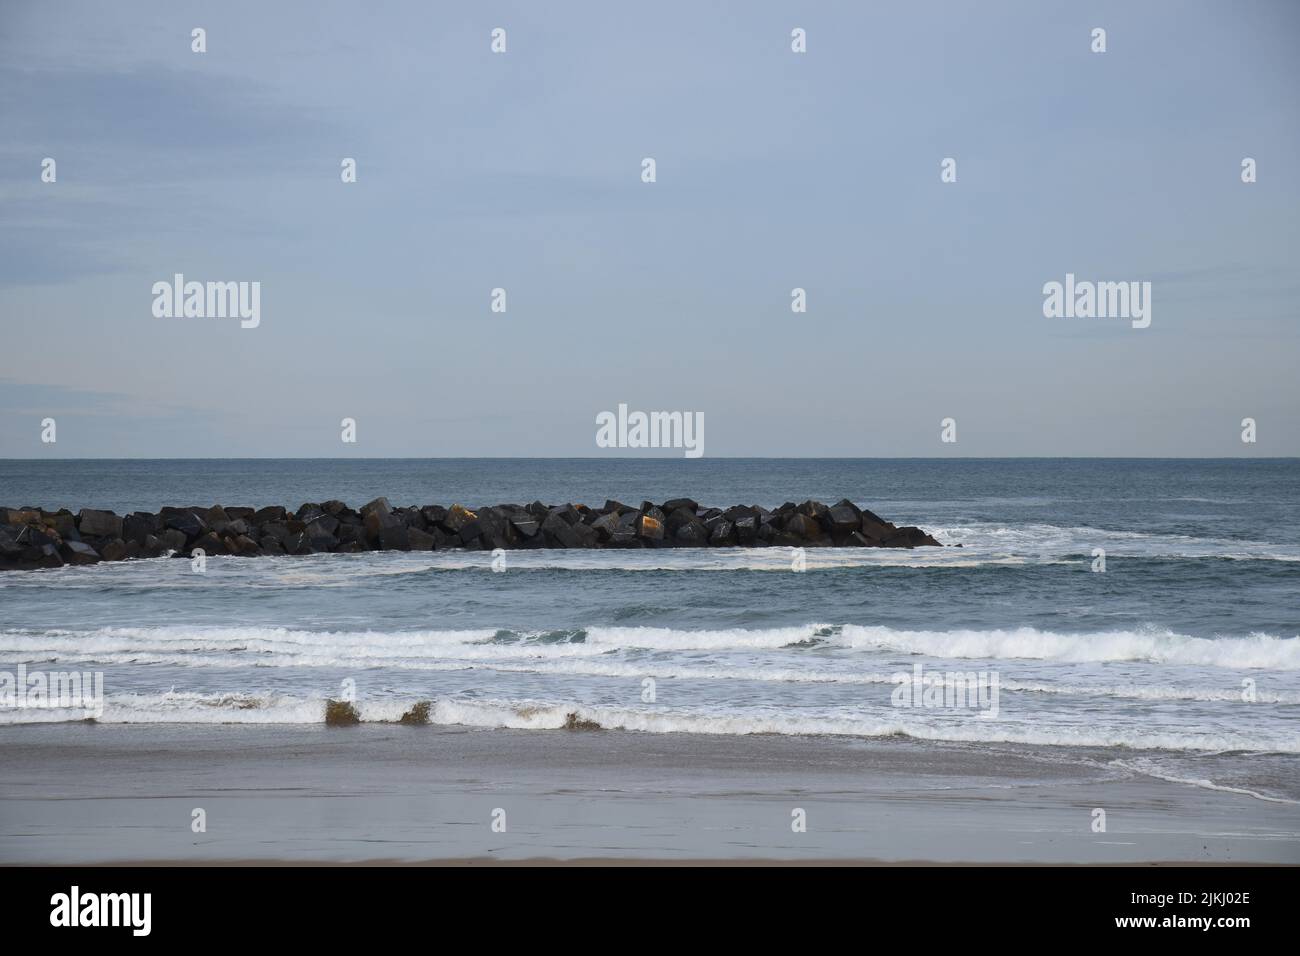 A view from a shore to some stones in the sea looks like wave breakers. Stock Photo